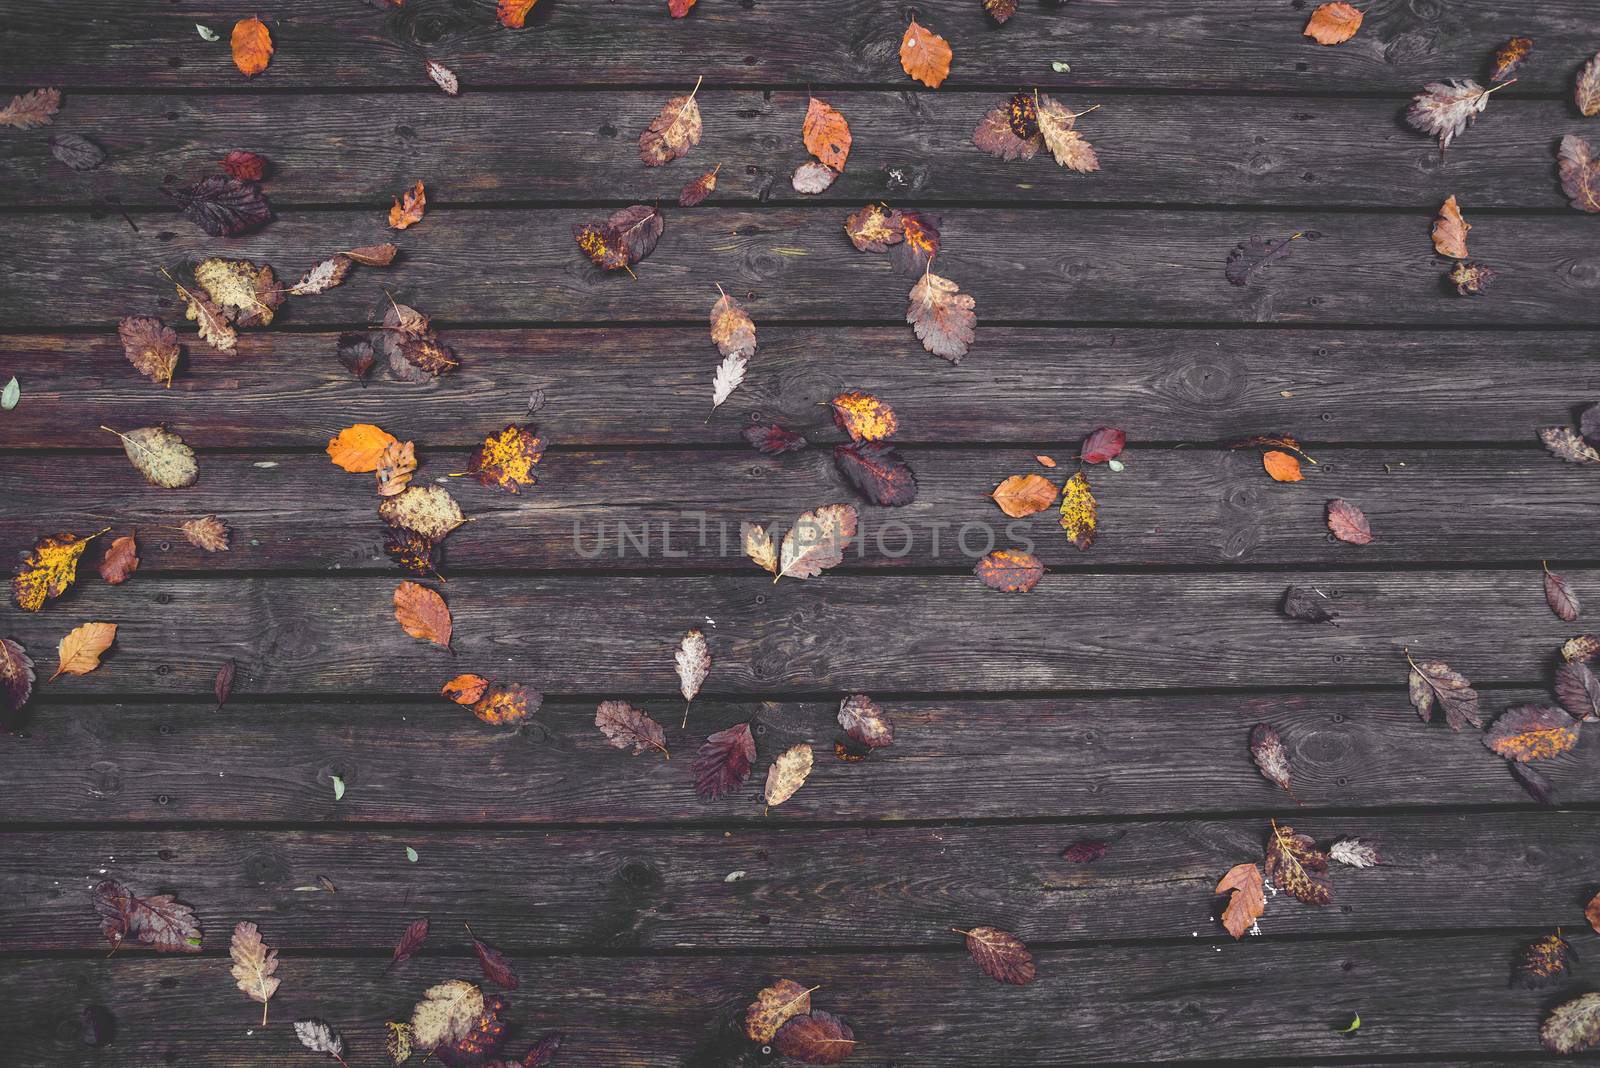 Autumn leaves on a wooden background with dark planks in the autumn season with colorful autumn leaves i various colors in the fall